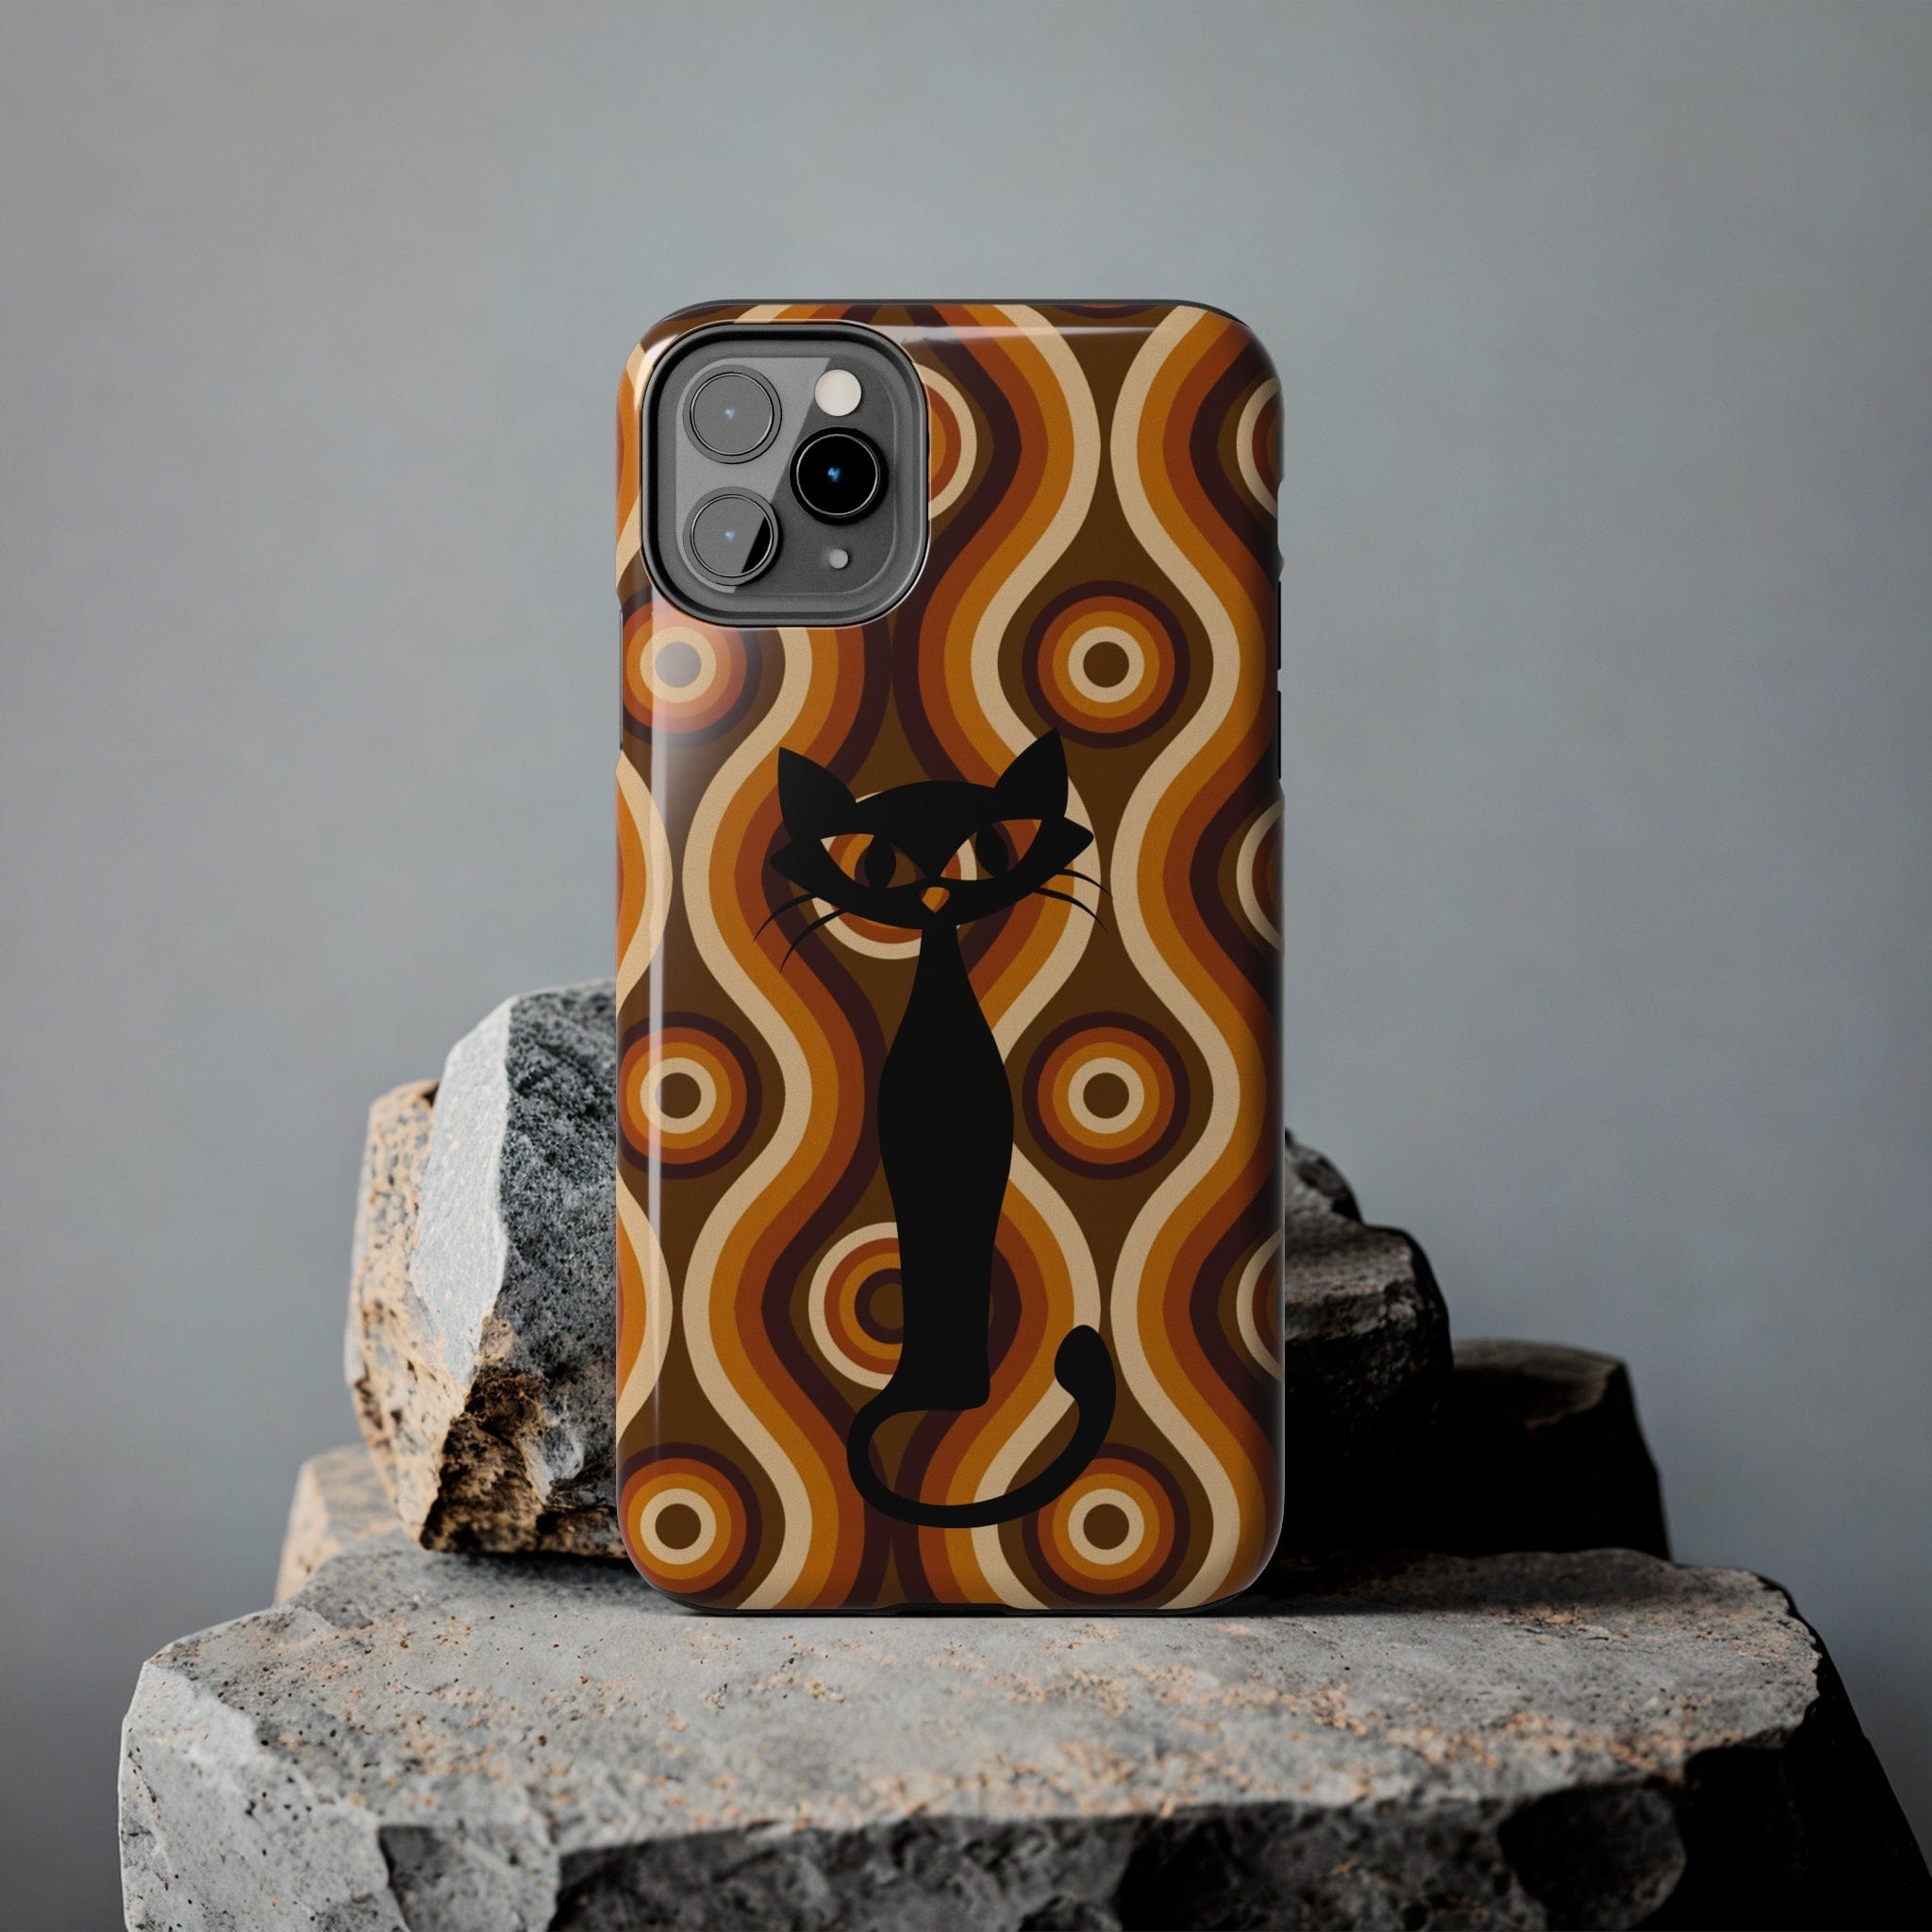 Retro Phone Case, Groovy Brown, Atomic Kitsch Cat Tough Smart Phone Cases Phone Case iPhone 11 Pro Max